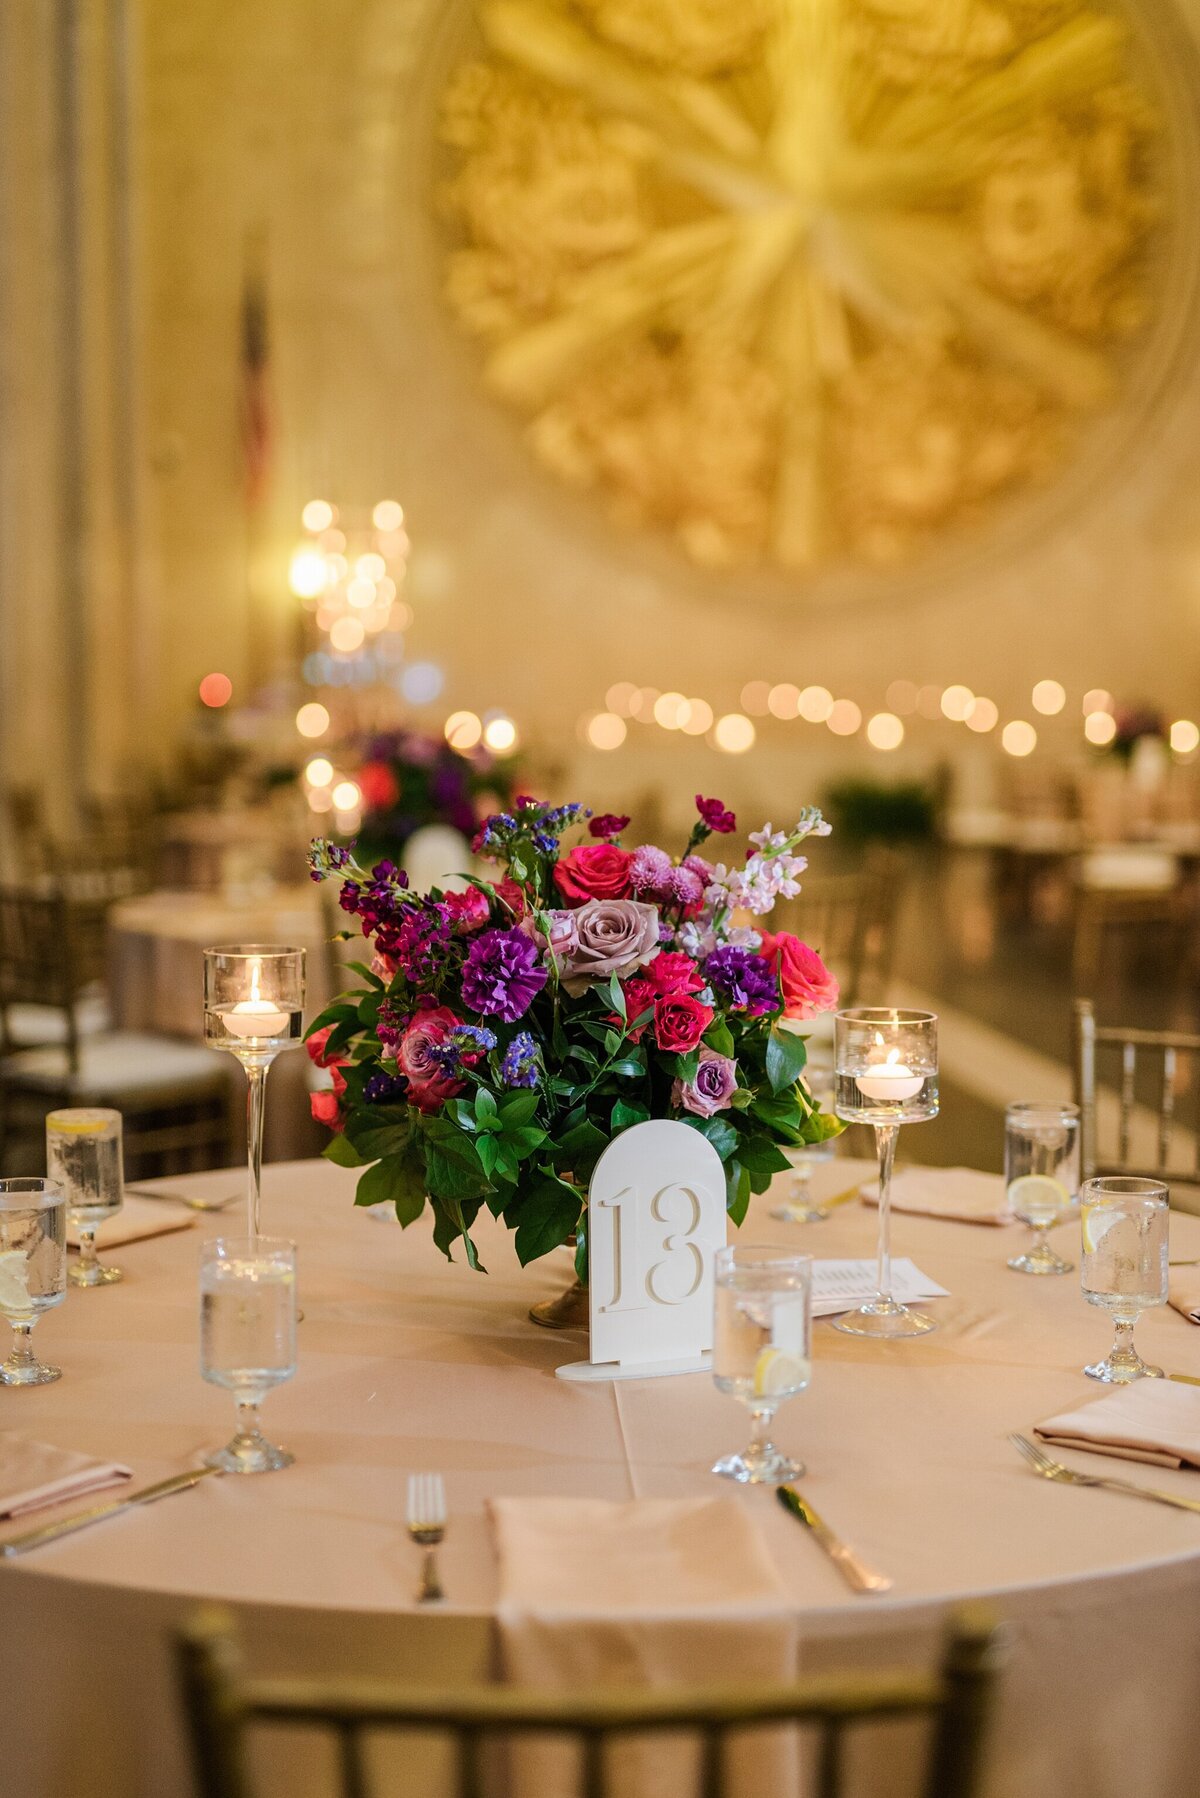 A detail shot of a reception table at a wedding reception at the Hall of State at Fair Park in Dallas, Texas. The large, round table is covered by a tablecloth and has multiple napkins, set of cutlery, glasses around the edge. In the middle of the table is a large bouquet of colorful flowers and a table number sign, and candles. Other similar tables can be seen in the background and a large gold crest can be seen up on the background wall.